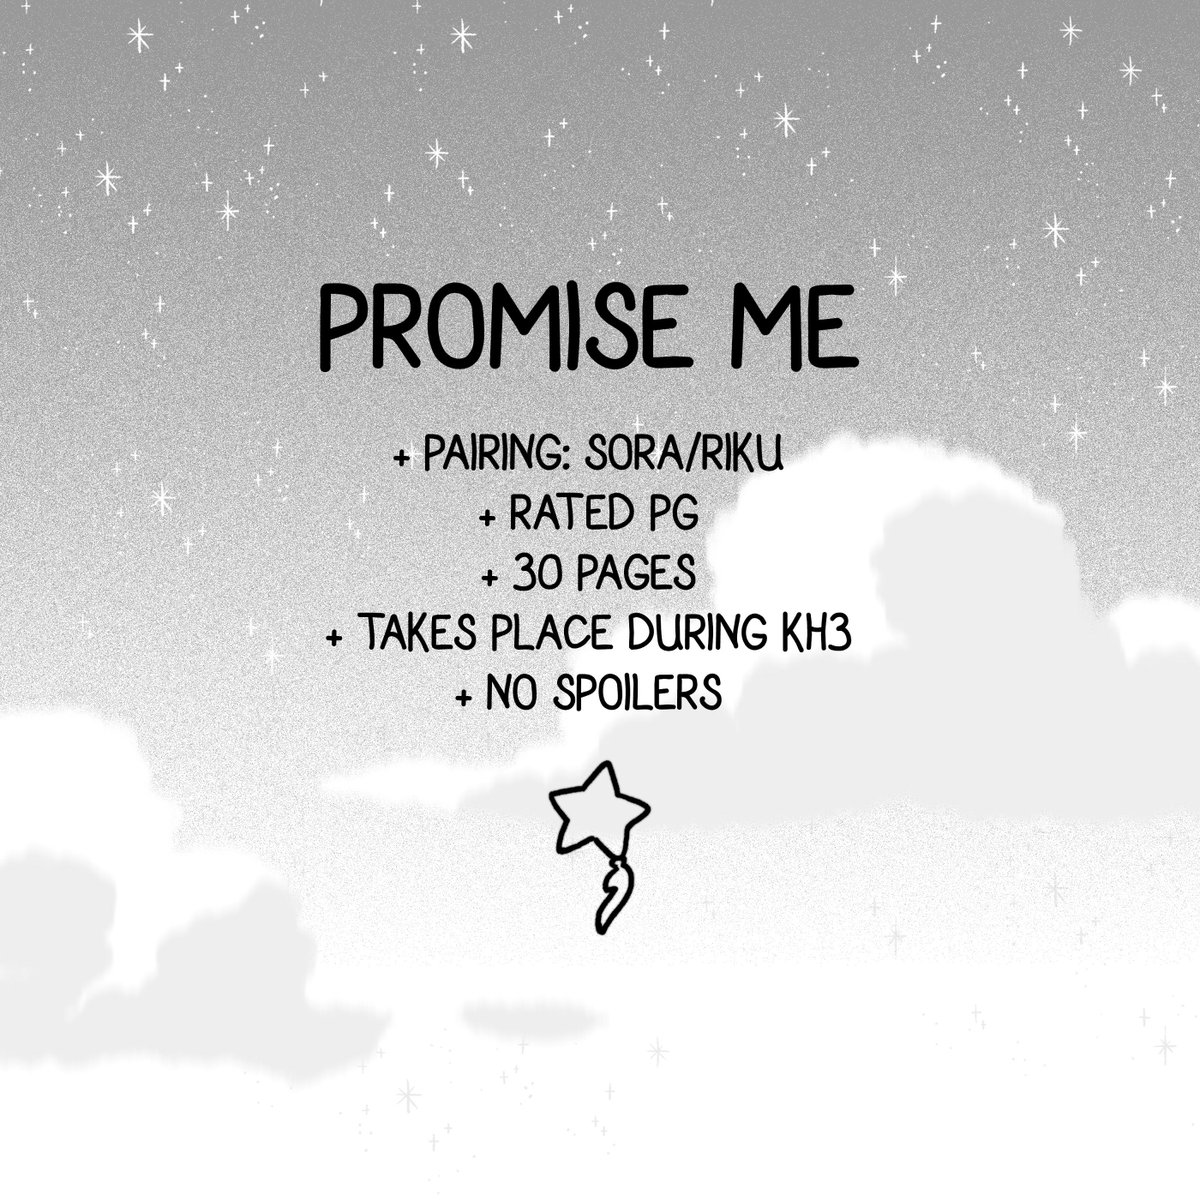 My new KH fancomic is now available for download! Since the game drops tomorrow, I've made it pay what you want! Enjoy! ✨
https://t.co/RZBHTJ3oPf
(no spoilers) 
#soriku 